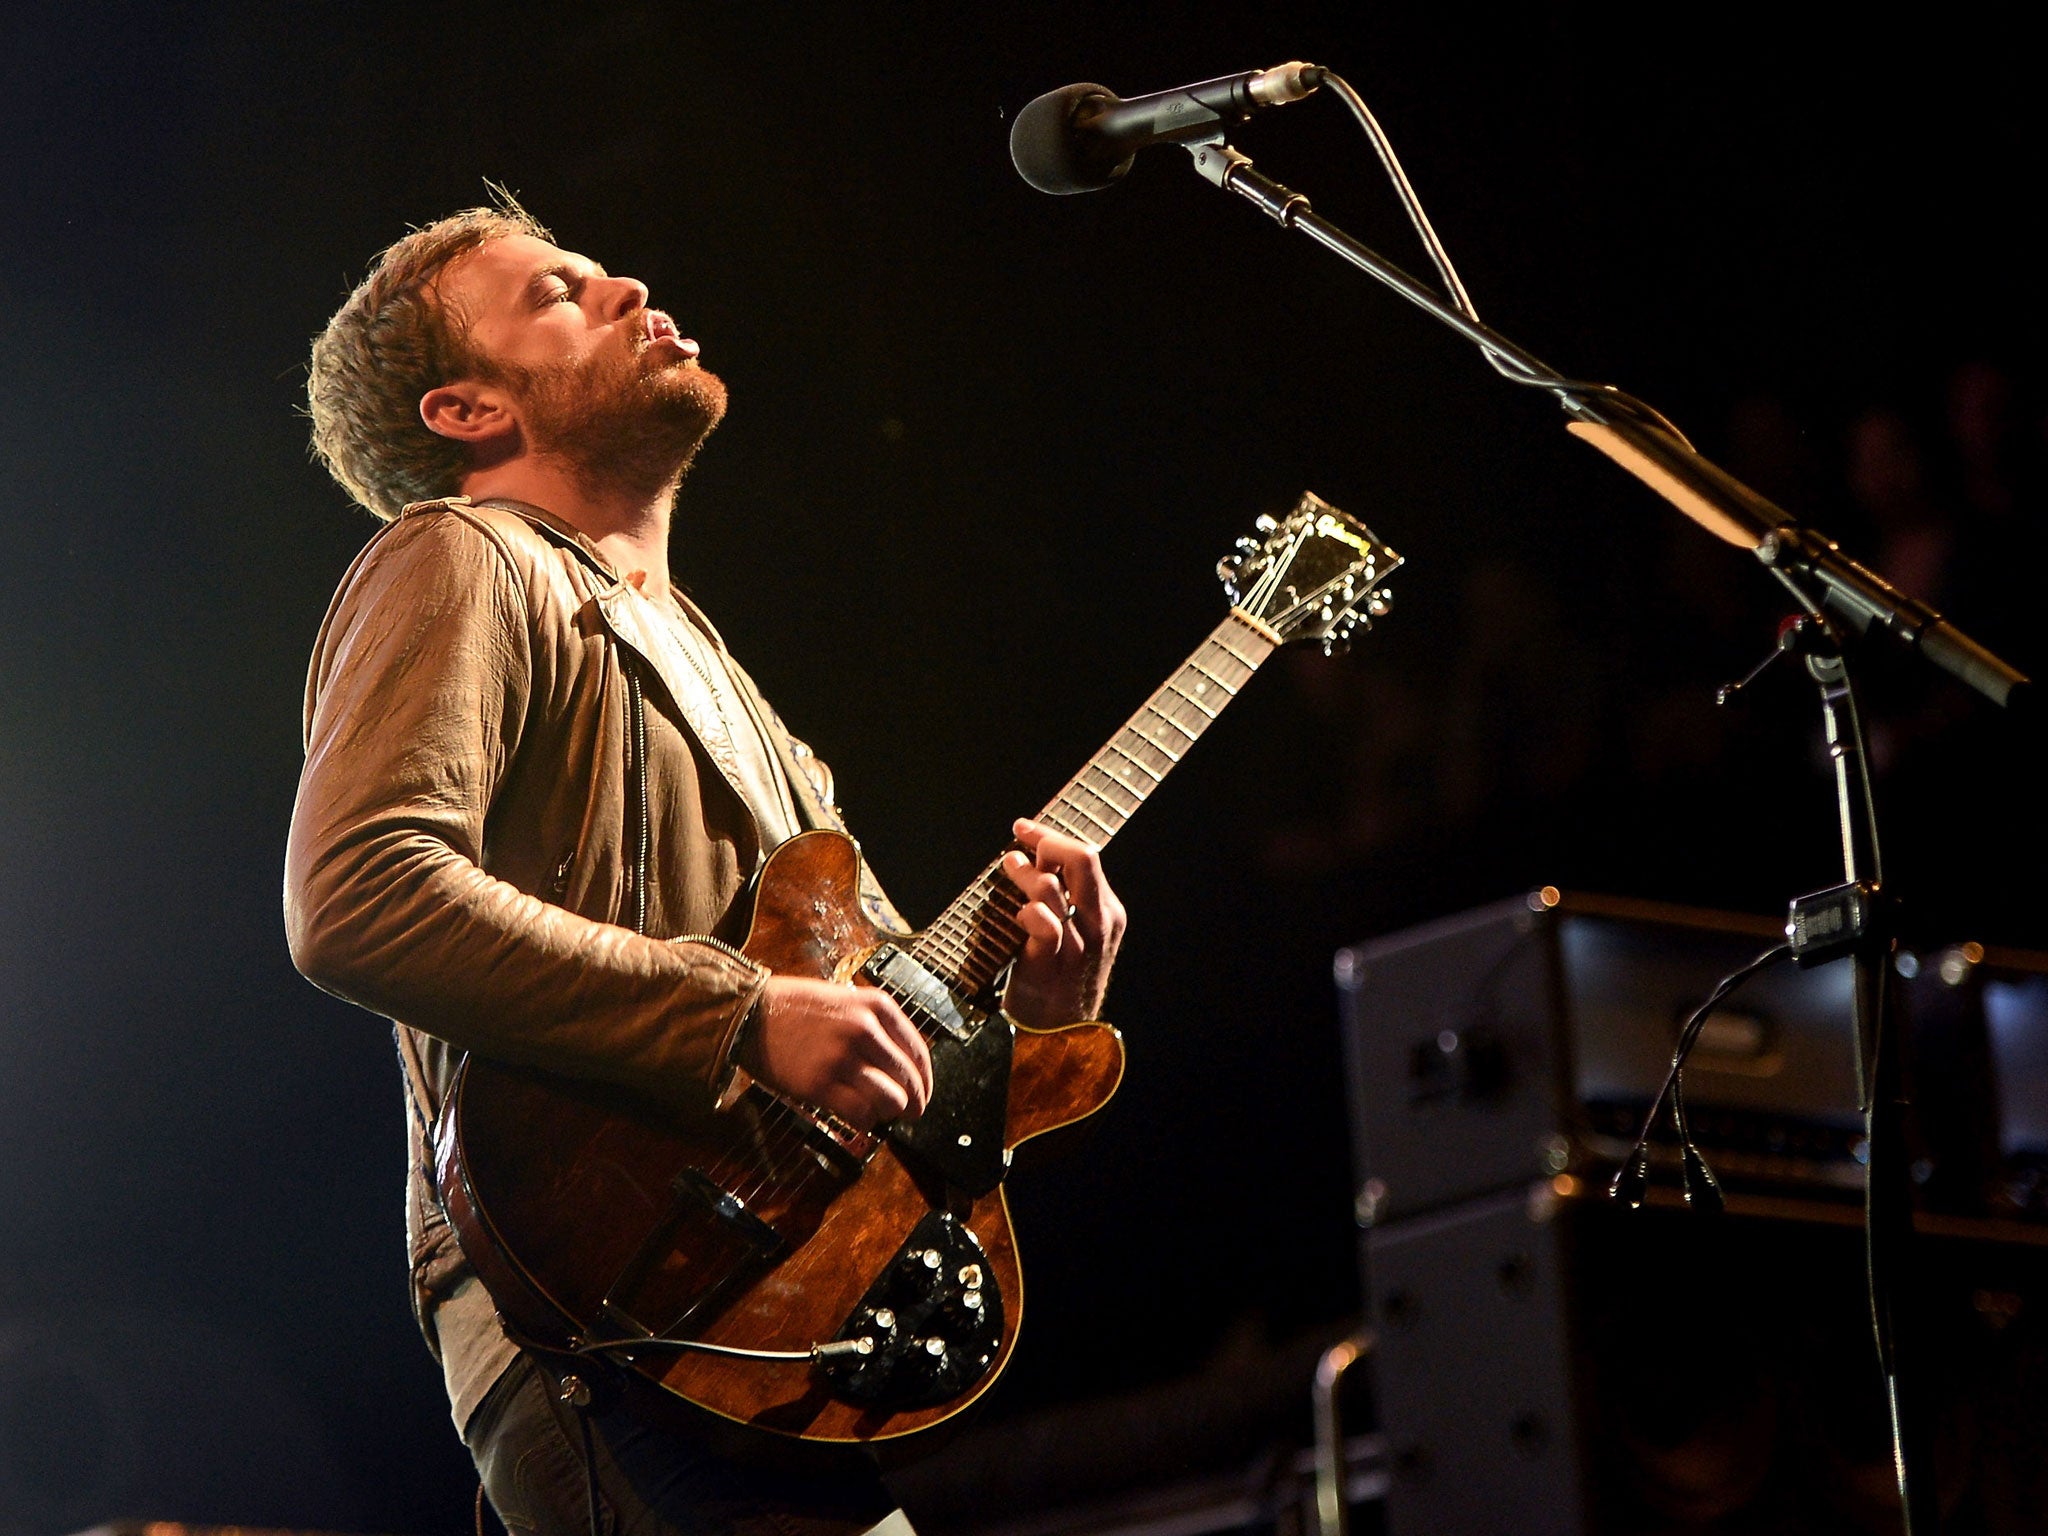 Caleb Followill of Kings of Leon, confirmed as the final headliners for the Isle of Wight Festival 2014